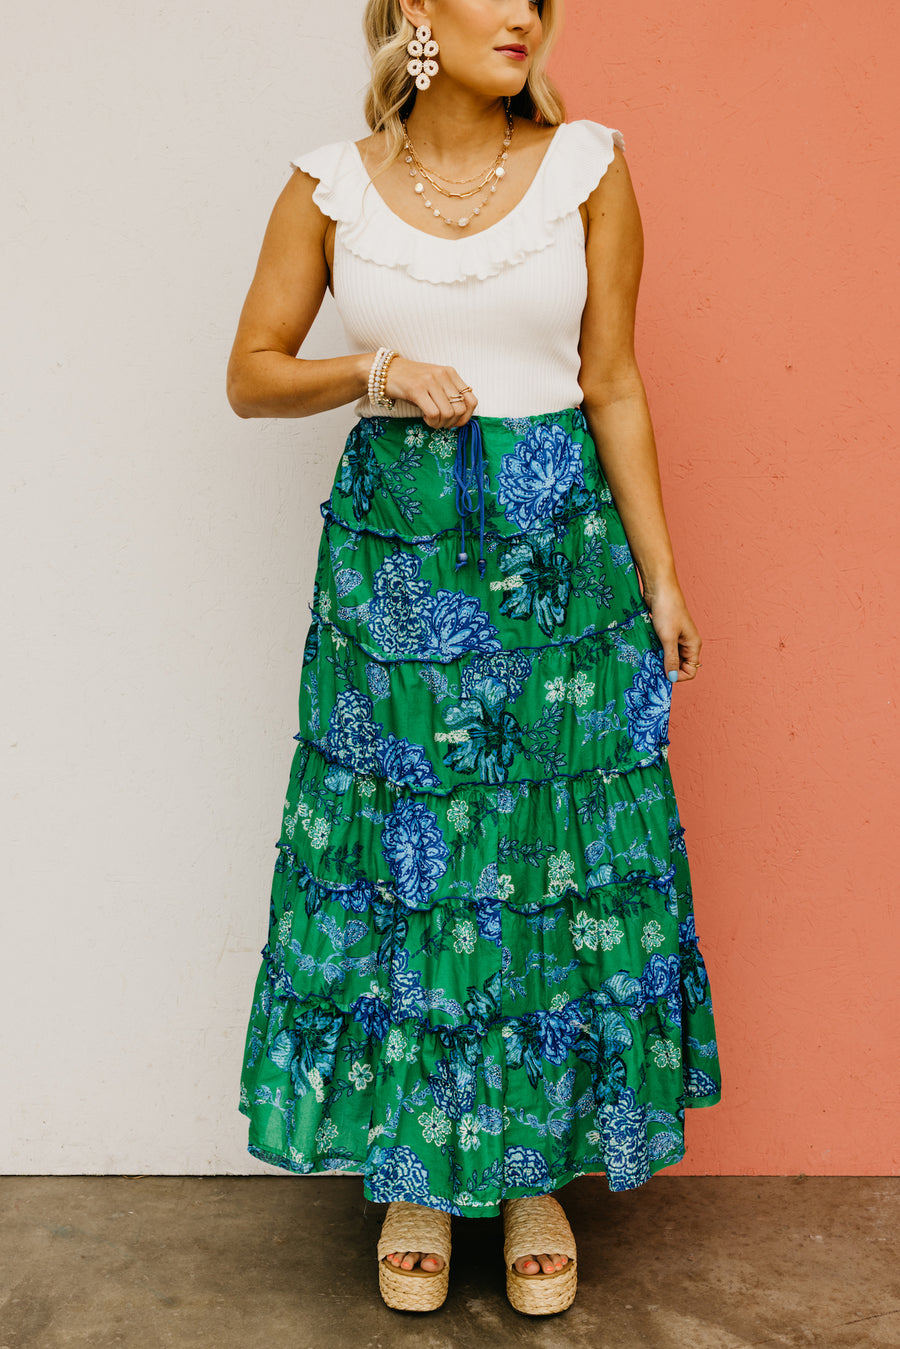 The Evelynn Floral Tiered Midi Skirt